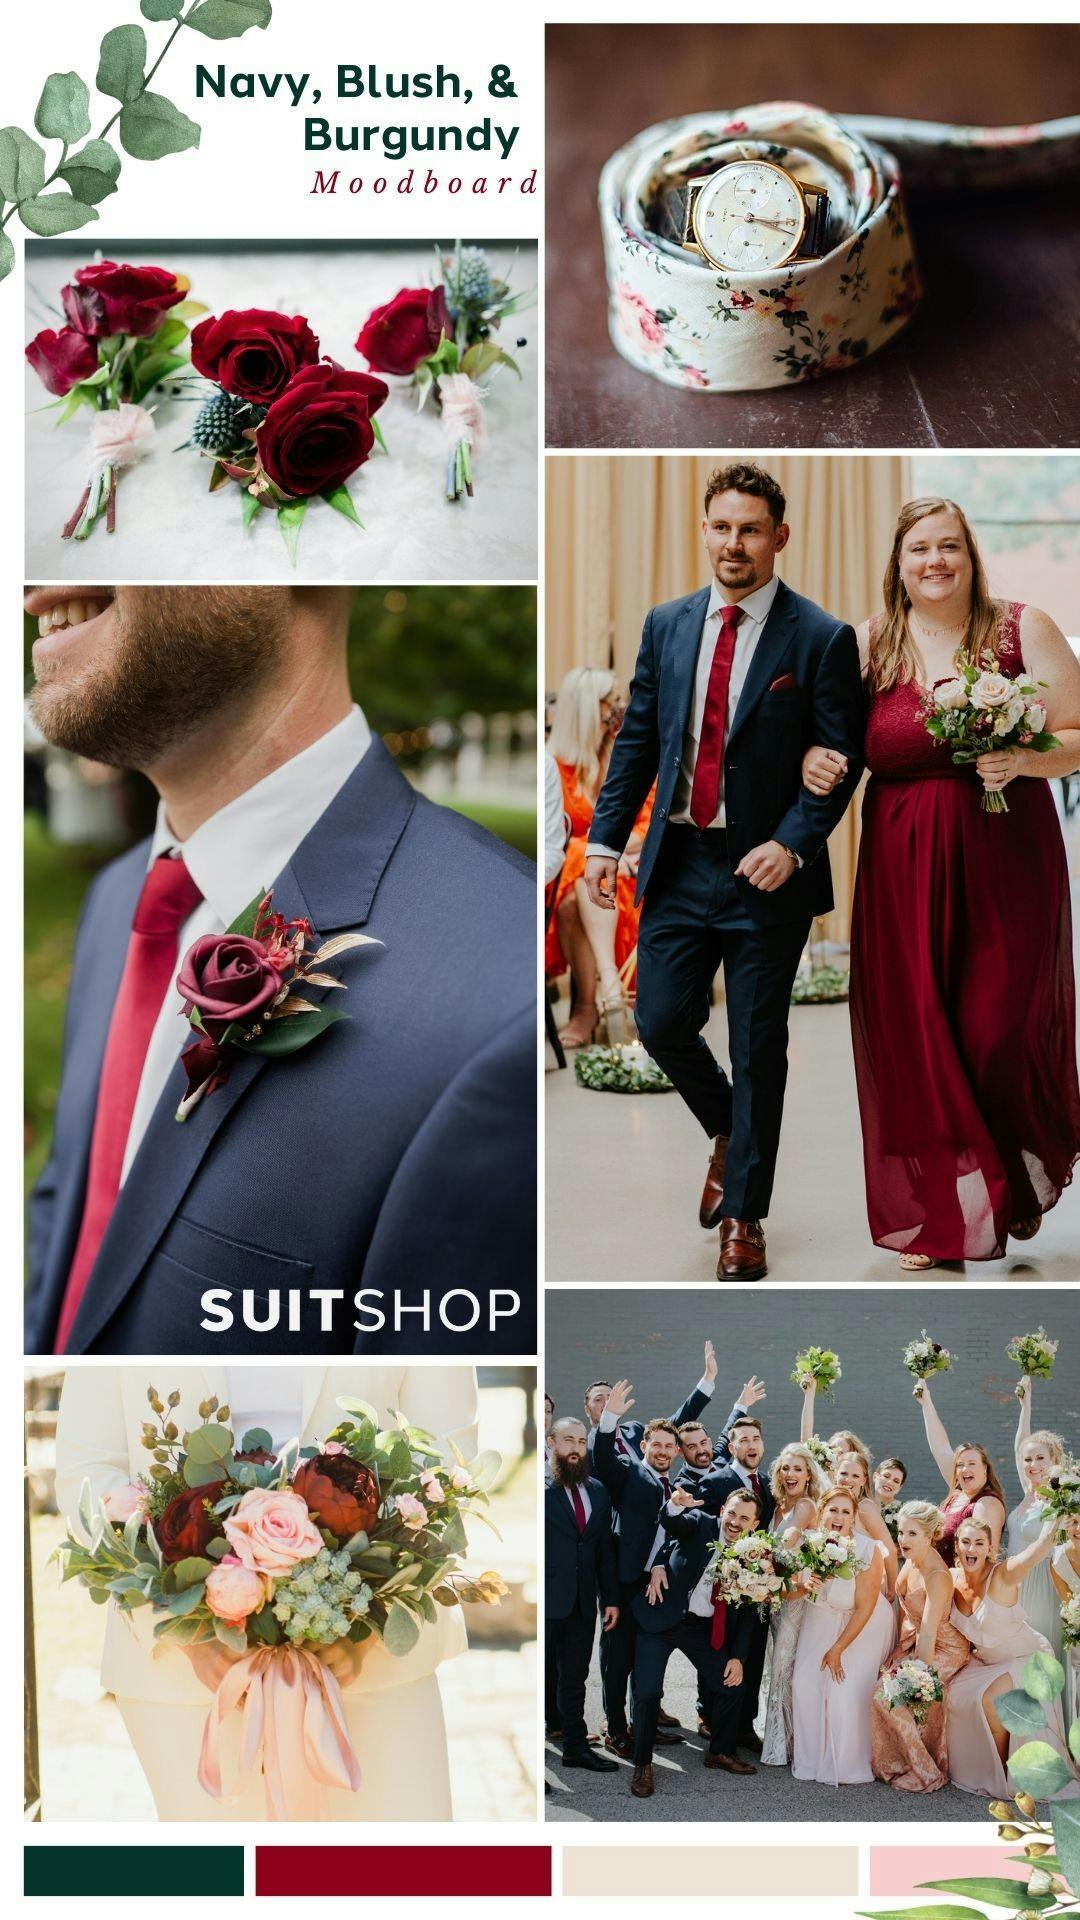 Wedding florals, ties, suits, dresses, and wedding party photos in a navy, blush, and burgundy color palette for spring.